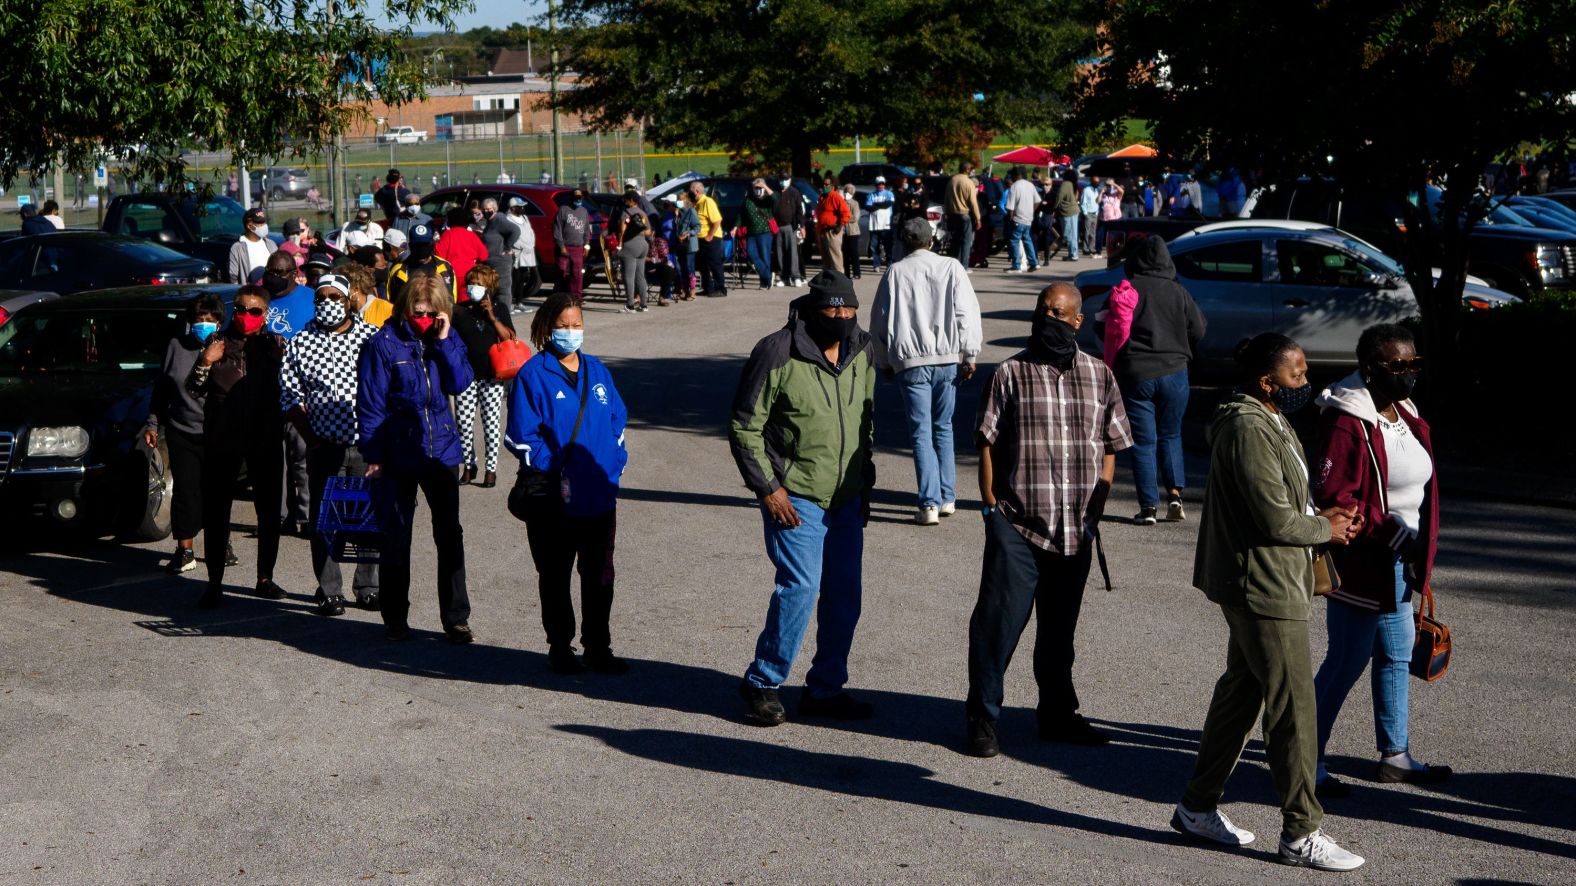 People wait to vote in Chattanooga, Tennessee, on October 14. Early voting had just opened in Tennessee, and some people said they waited 90 minutes to just reach the entrance.